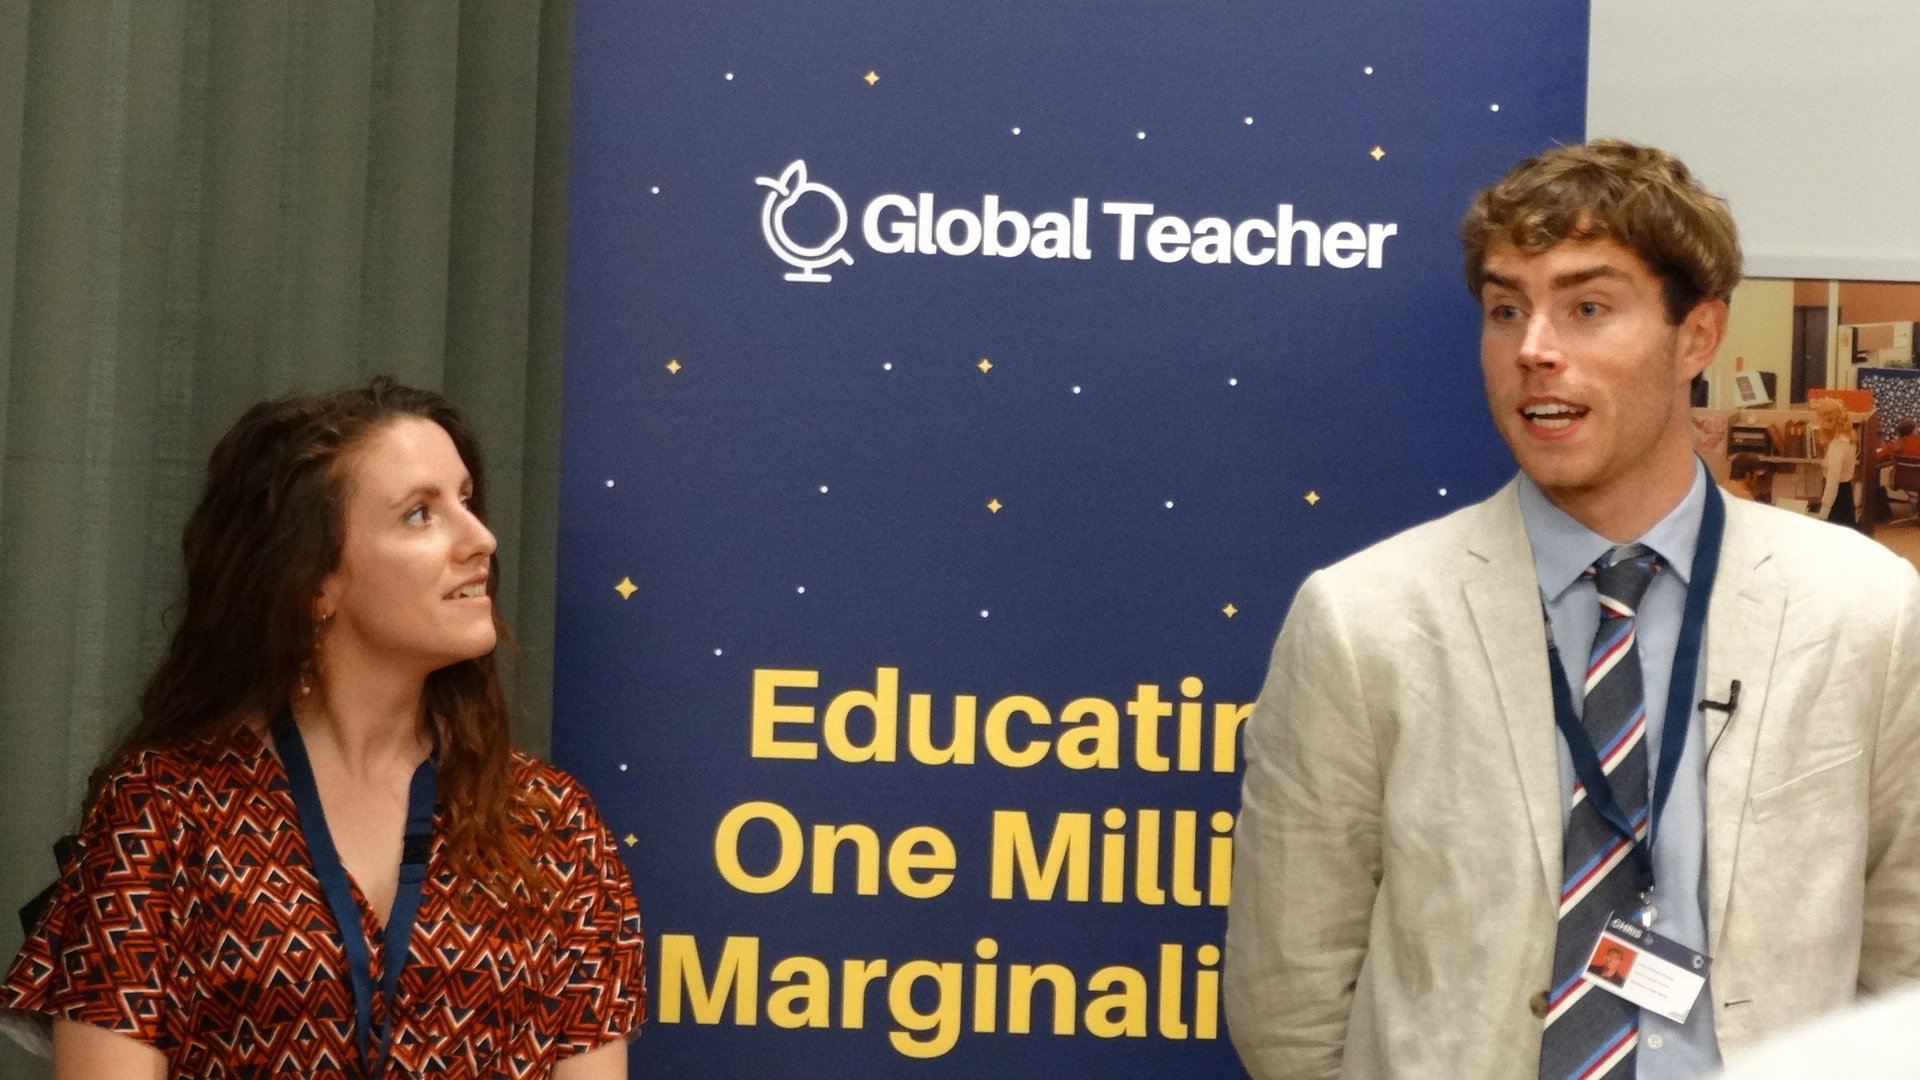 Jess Whitaker, Global Teacher trustee and COCO partnerships manager and Chris Nutman, Global Teacher founder